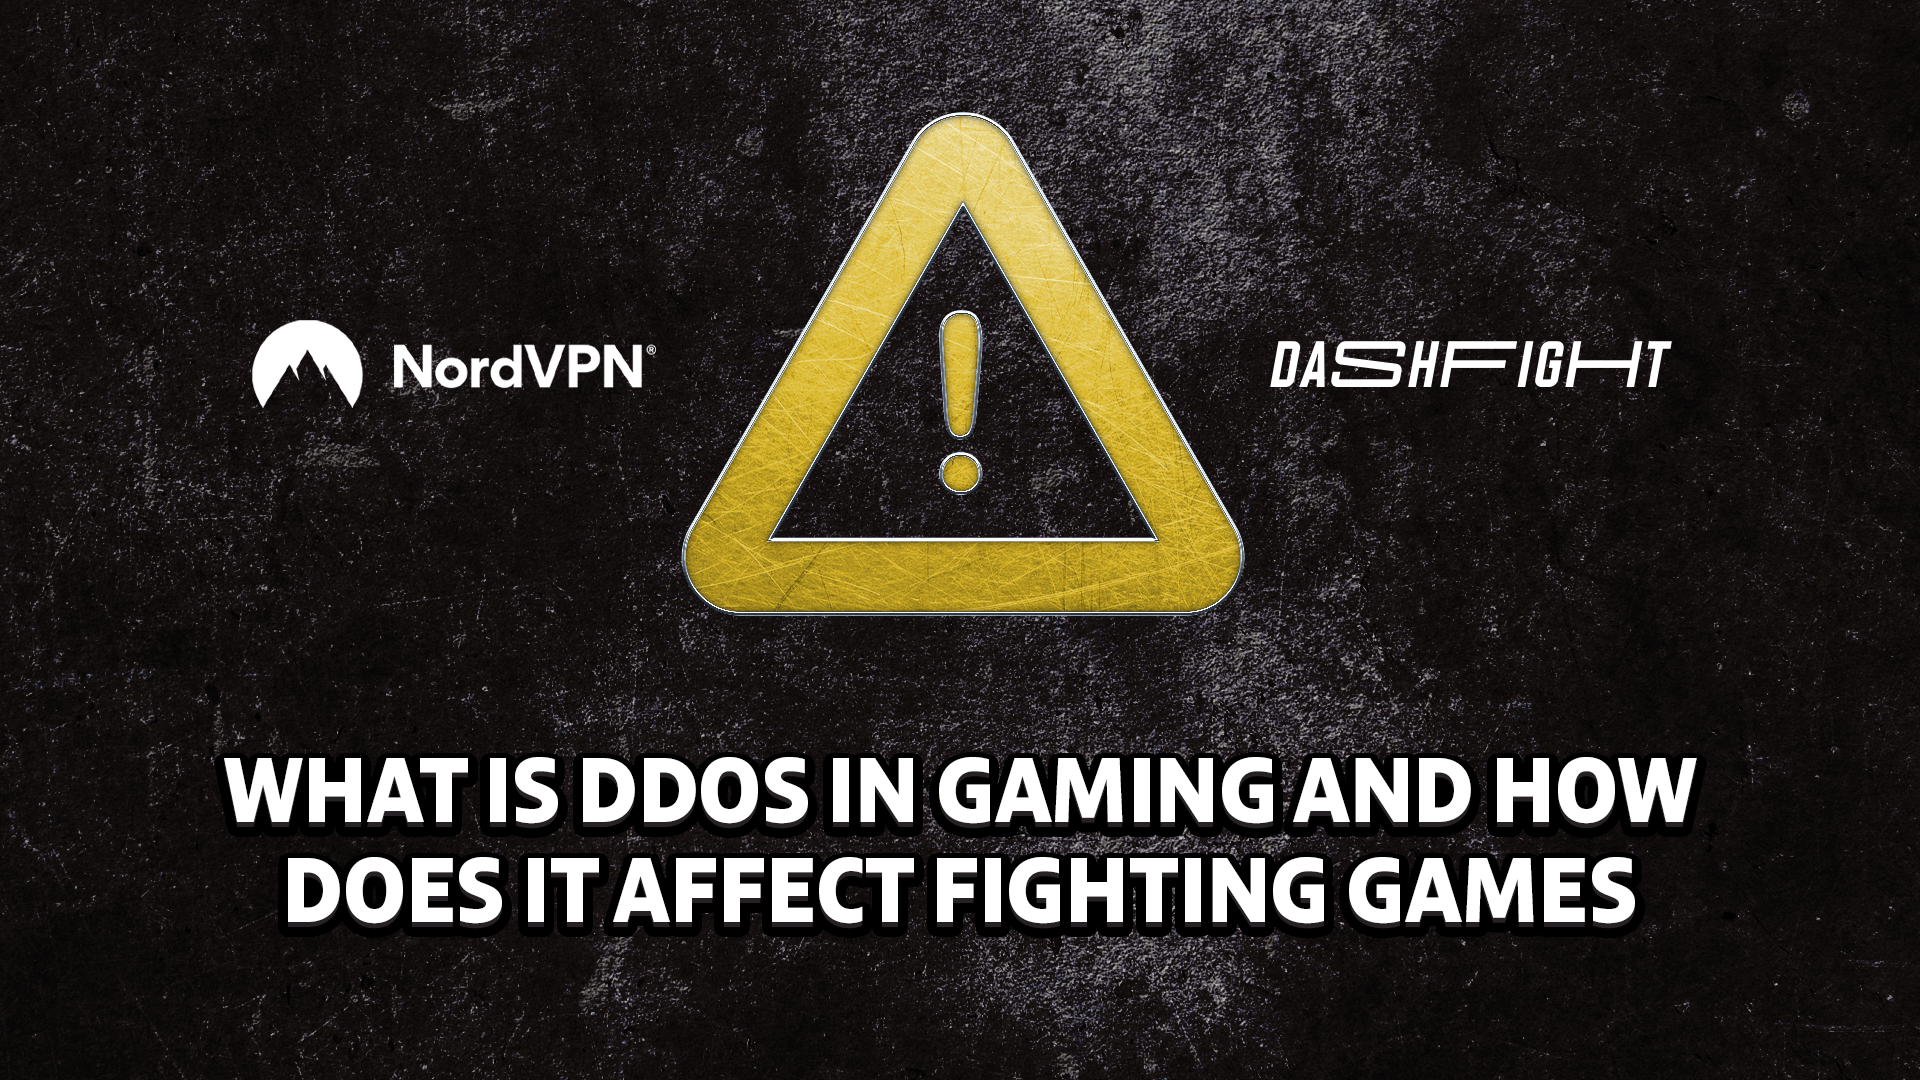 What is DDoS in gaming and how does it affect fighting games